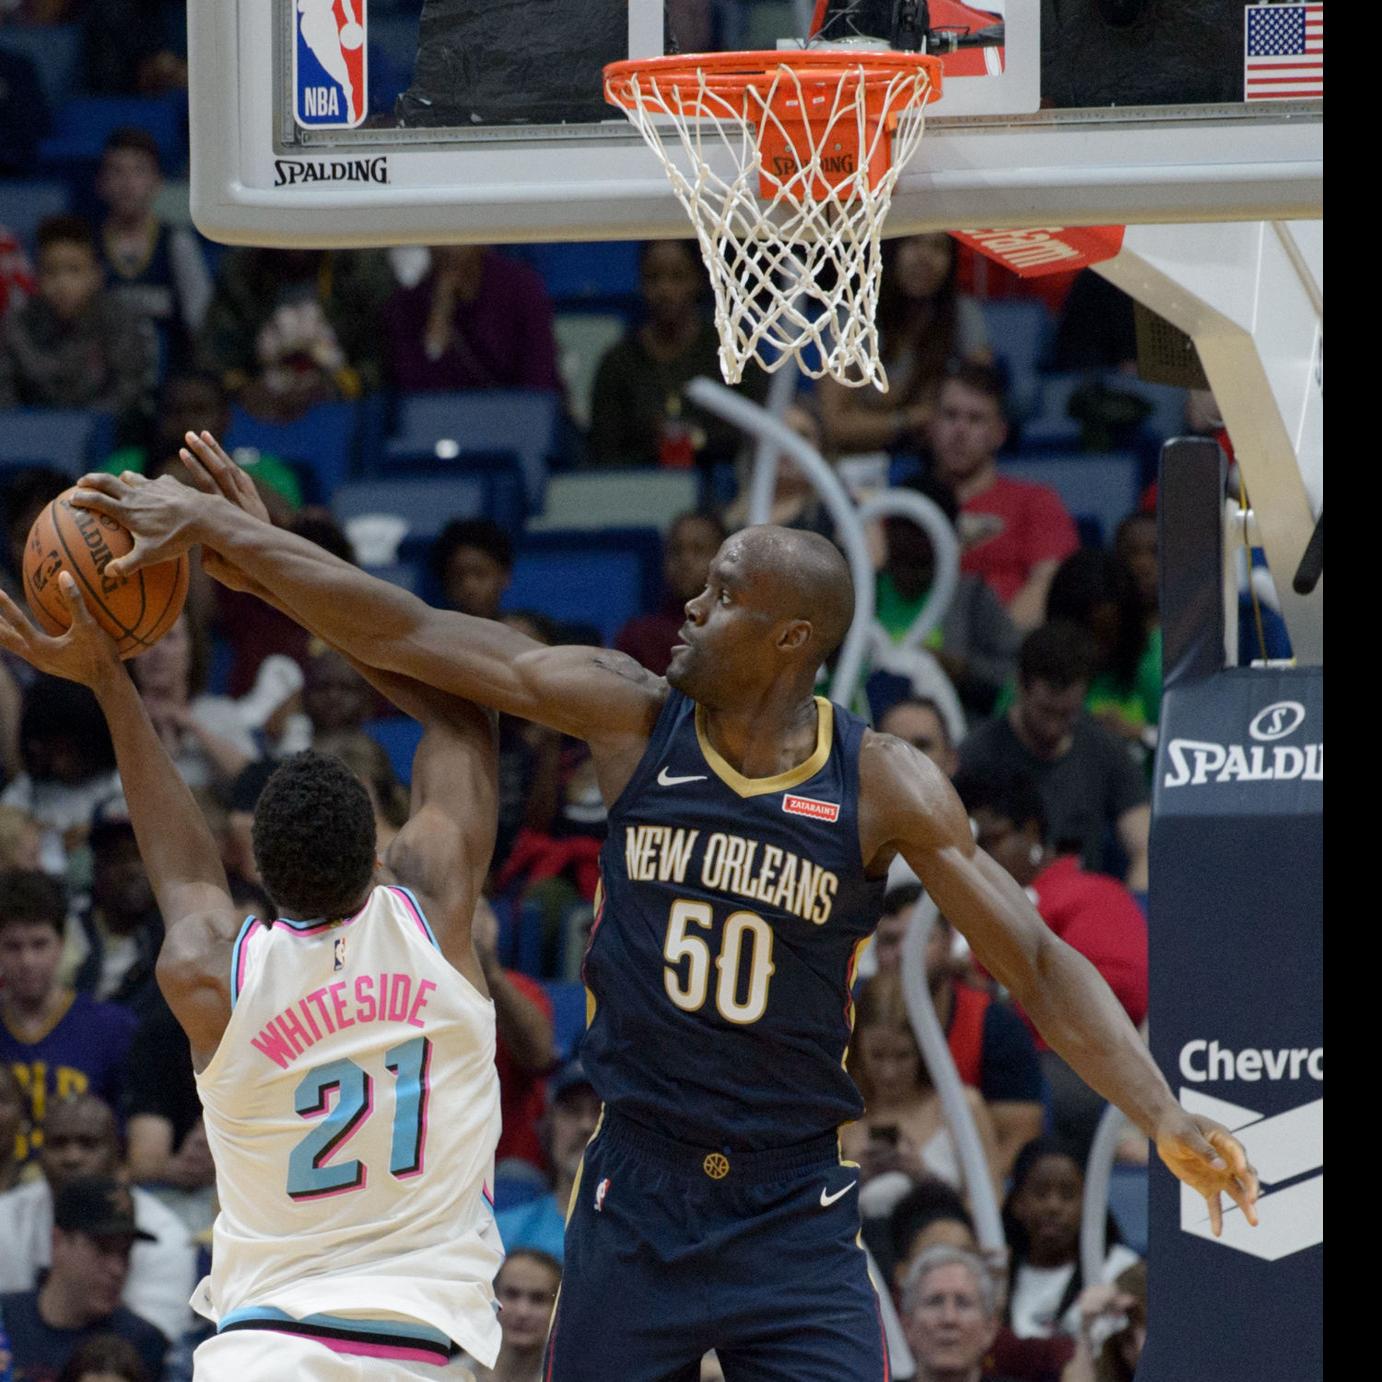 Pelicans sign Emeka Okafor to 10-day contract